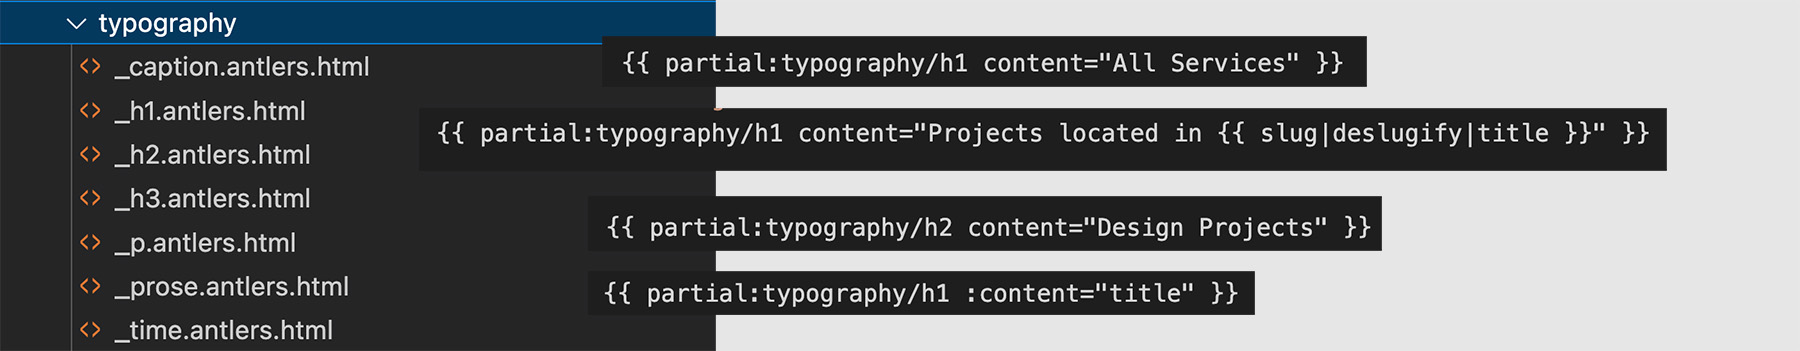 Examples of syntax for customizing typography partials in Peak Starter Kit for Statamic.